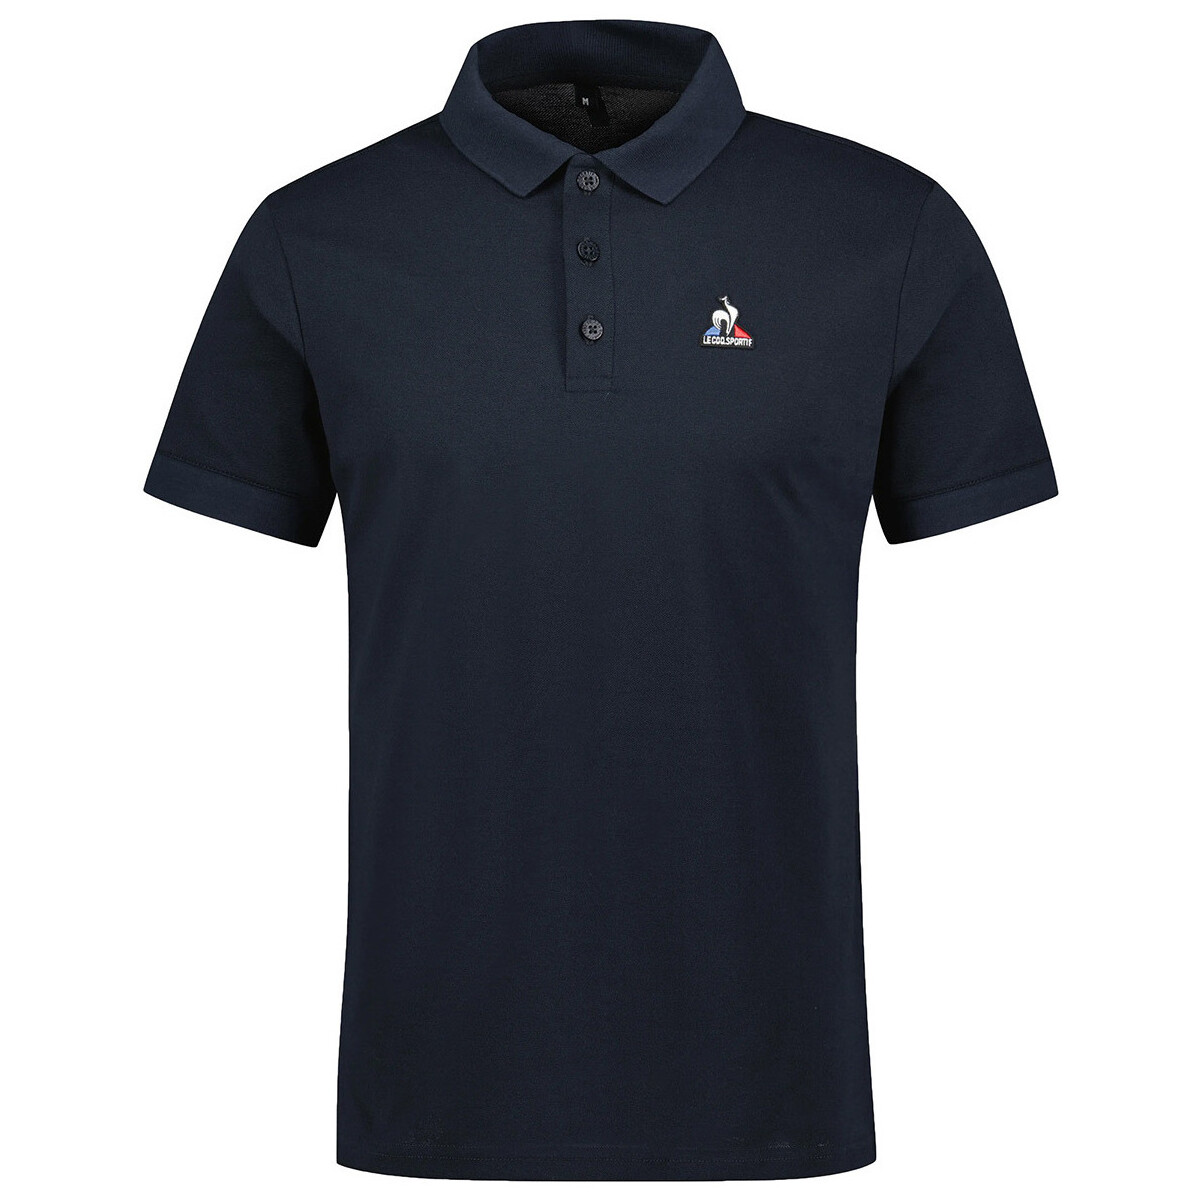 Vêtements Homme Lyle and Scott Yoke Pull-over Polo Junior Boys Le Coq Sportif Ess Pull-over Polo Ss N°2 Bleu